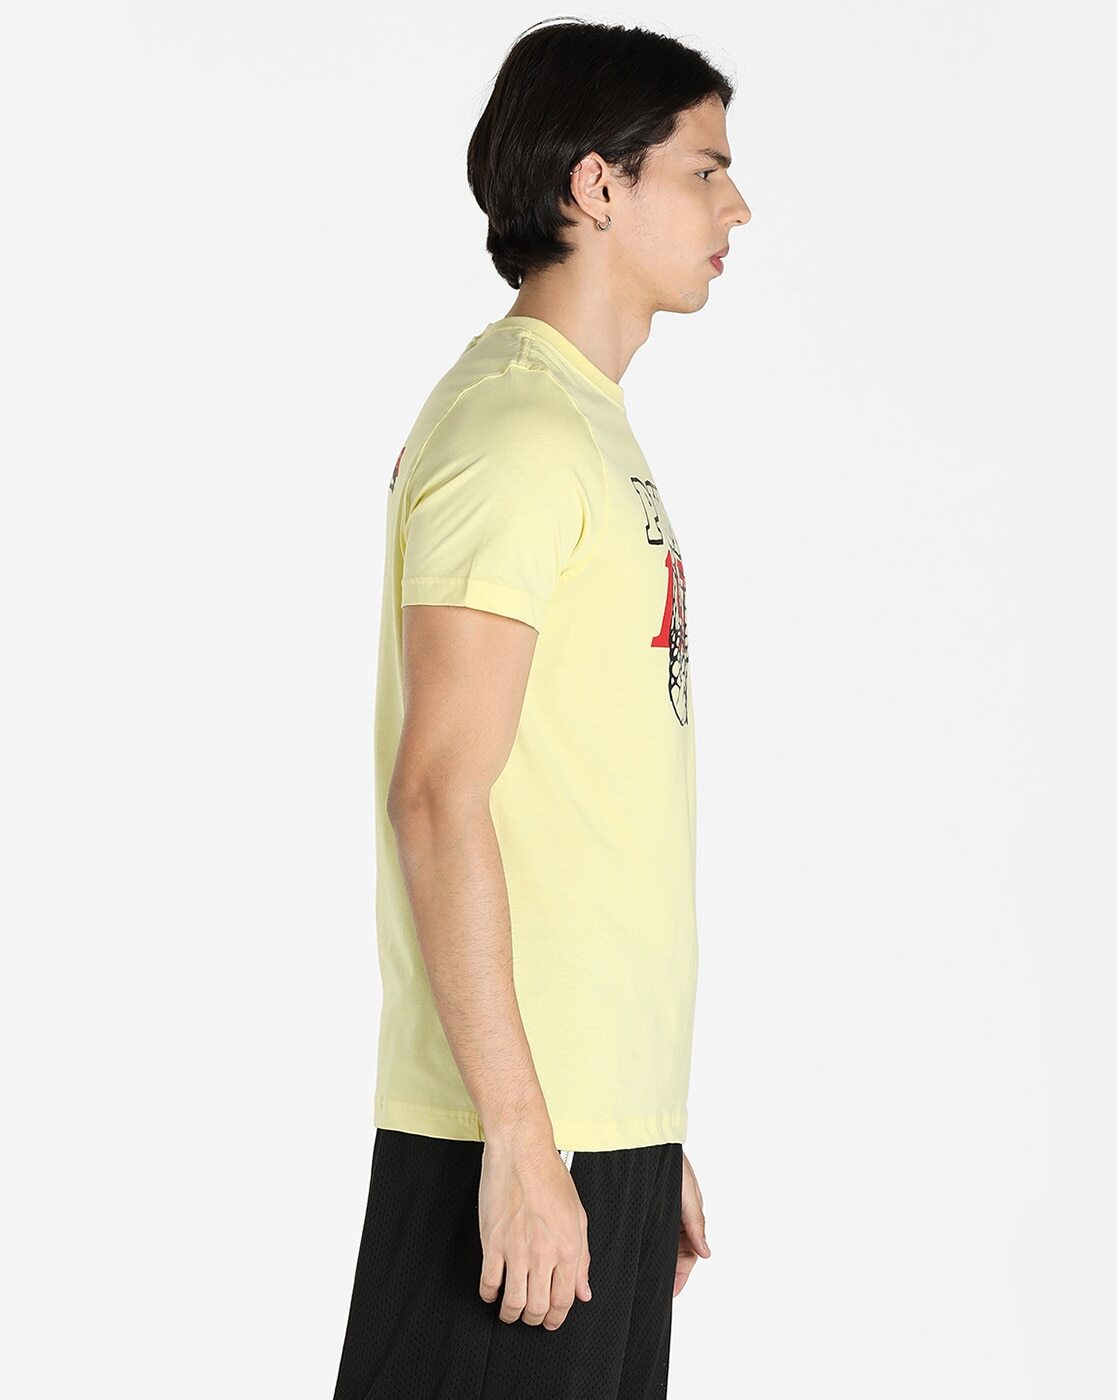 Scouted Slim Fit Crew-Neck T-shirt-535242 02